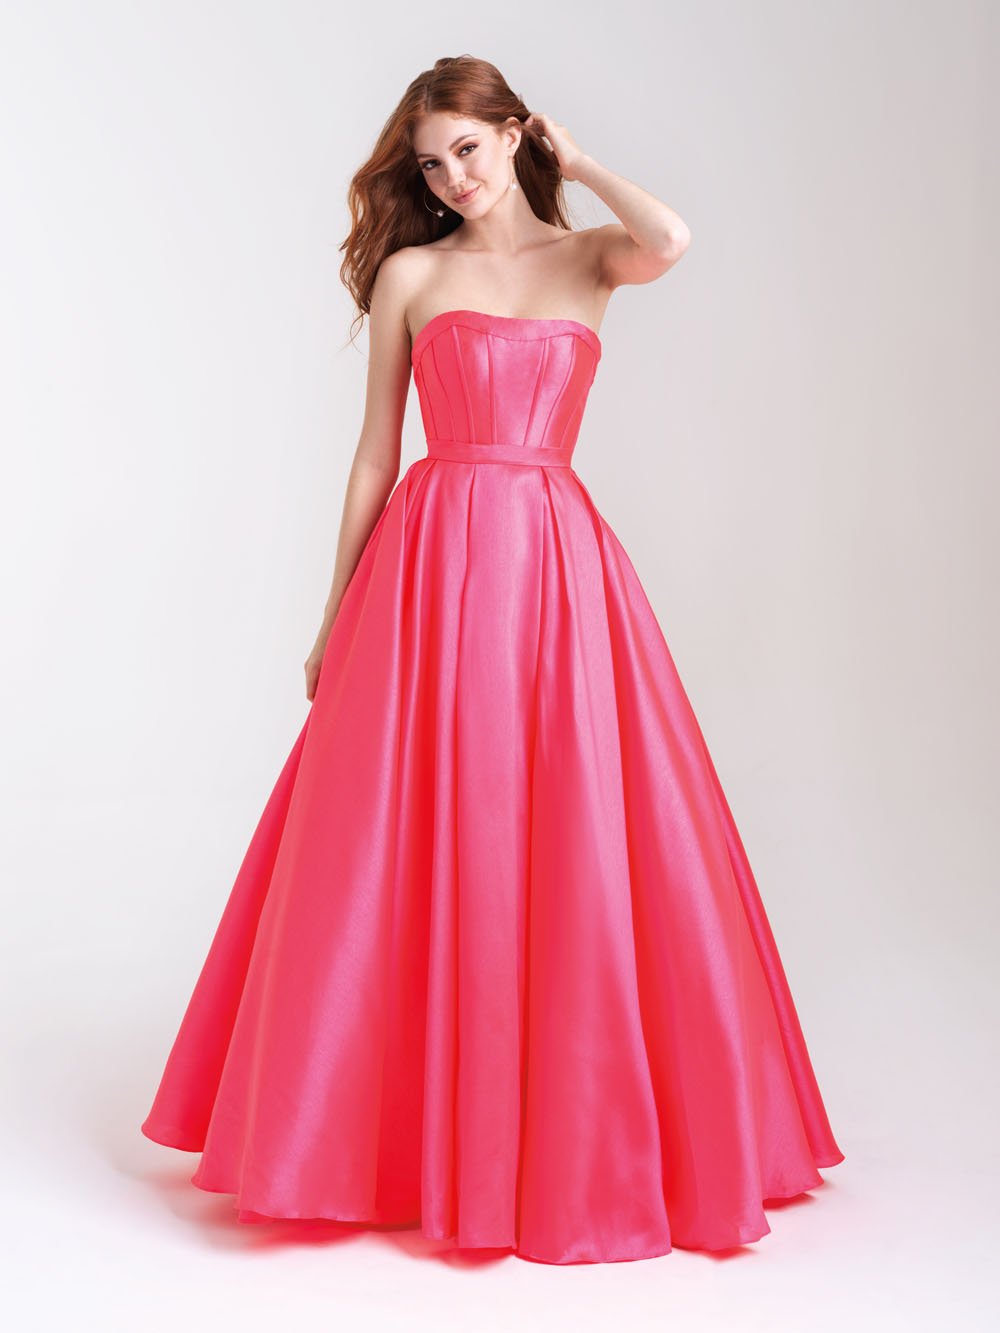 Madison James 20-323 dress images in these colors: Royal, Yellow, Burgundy, Coral, Pink.